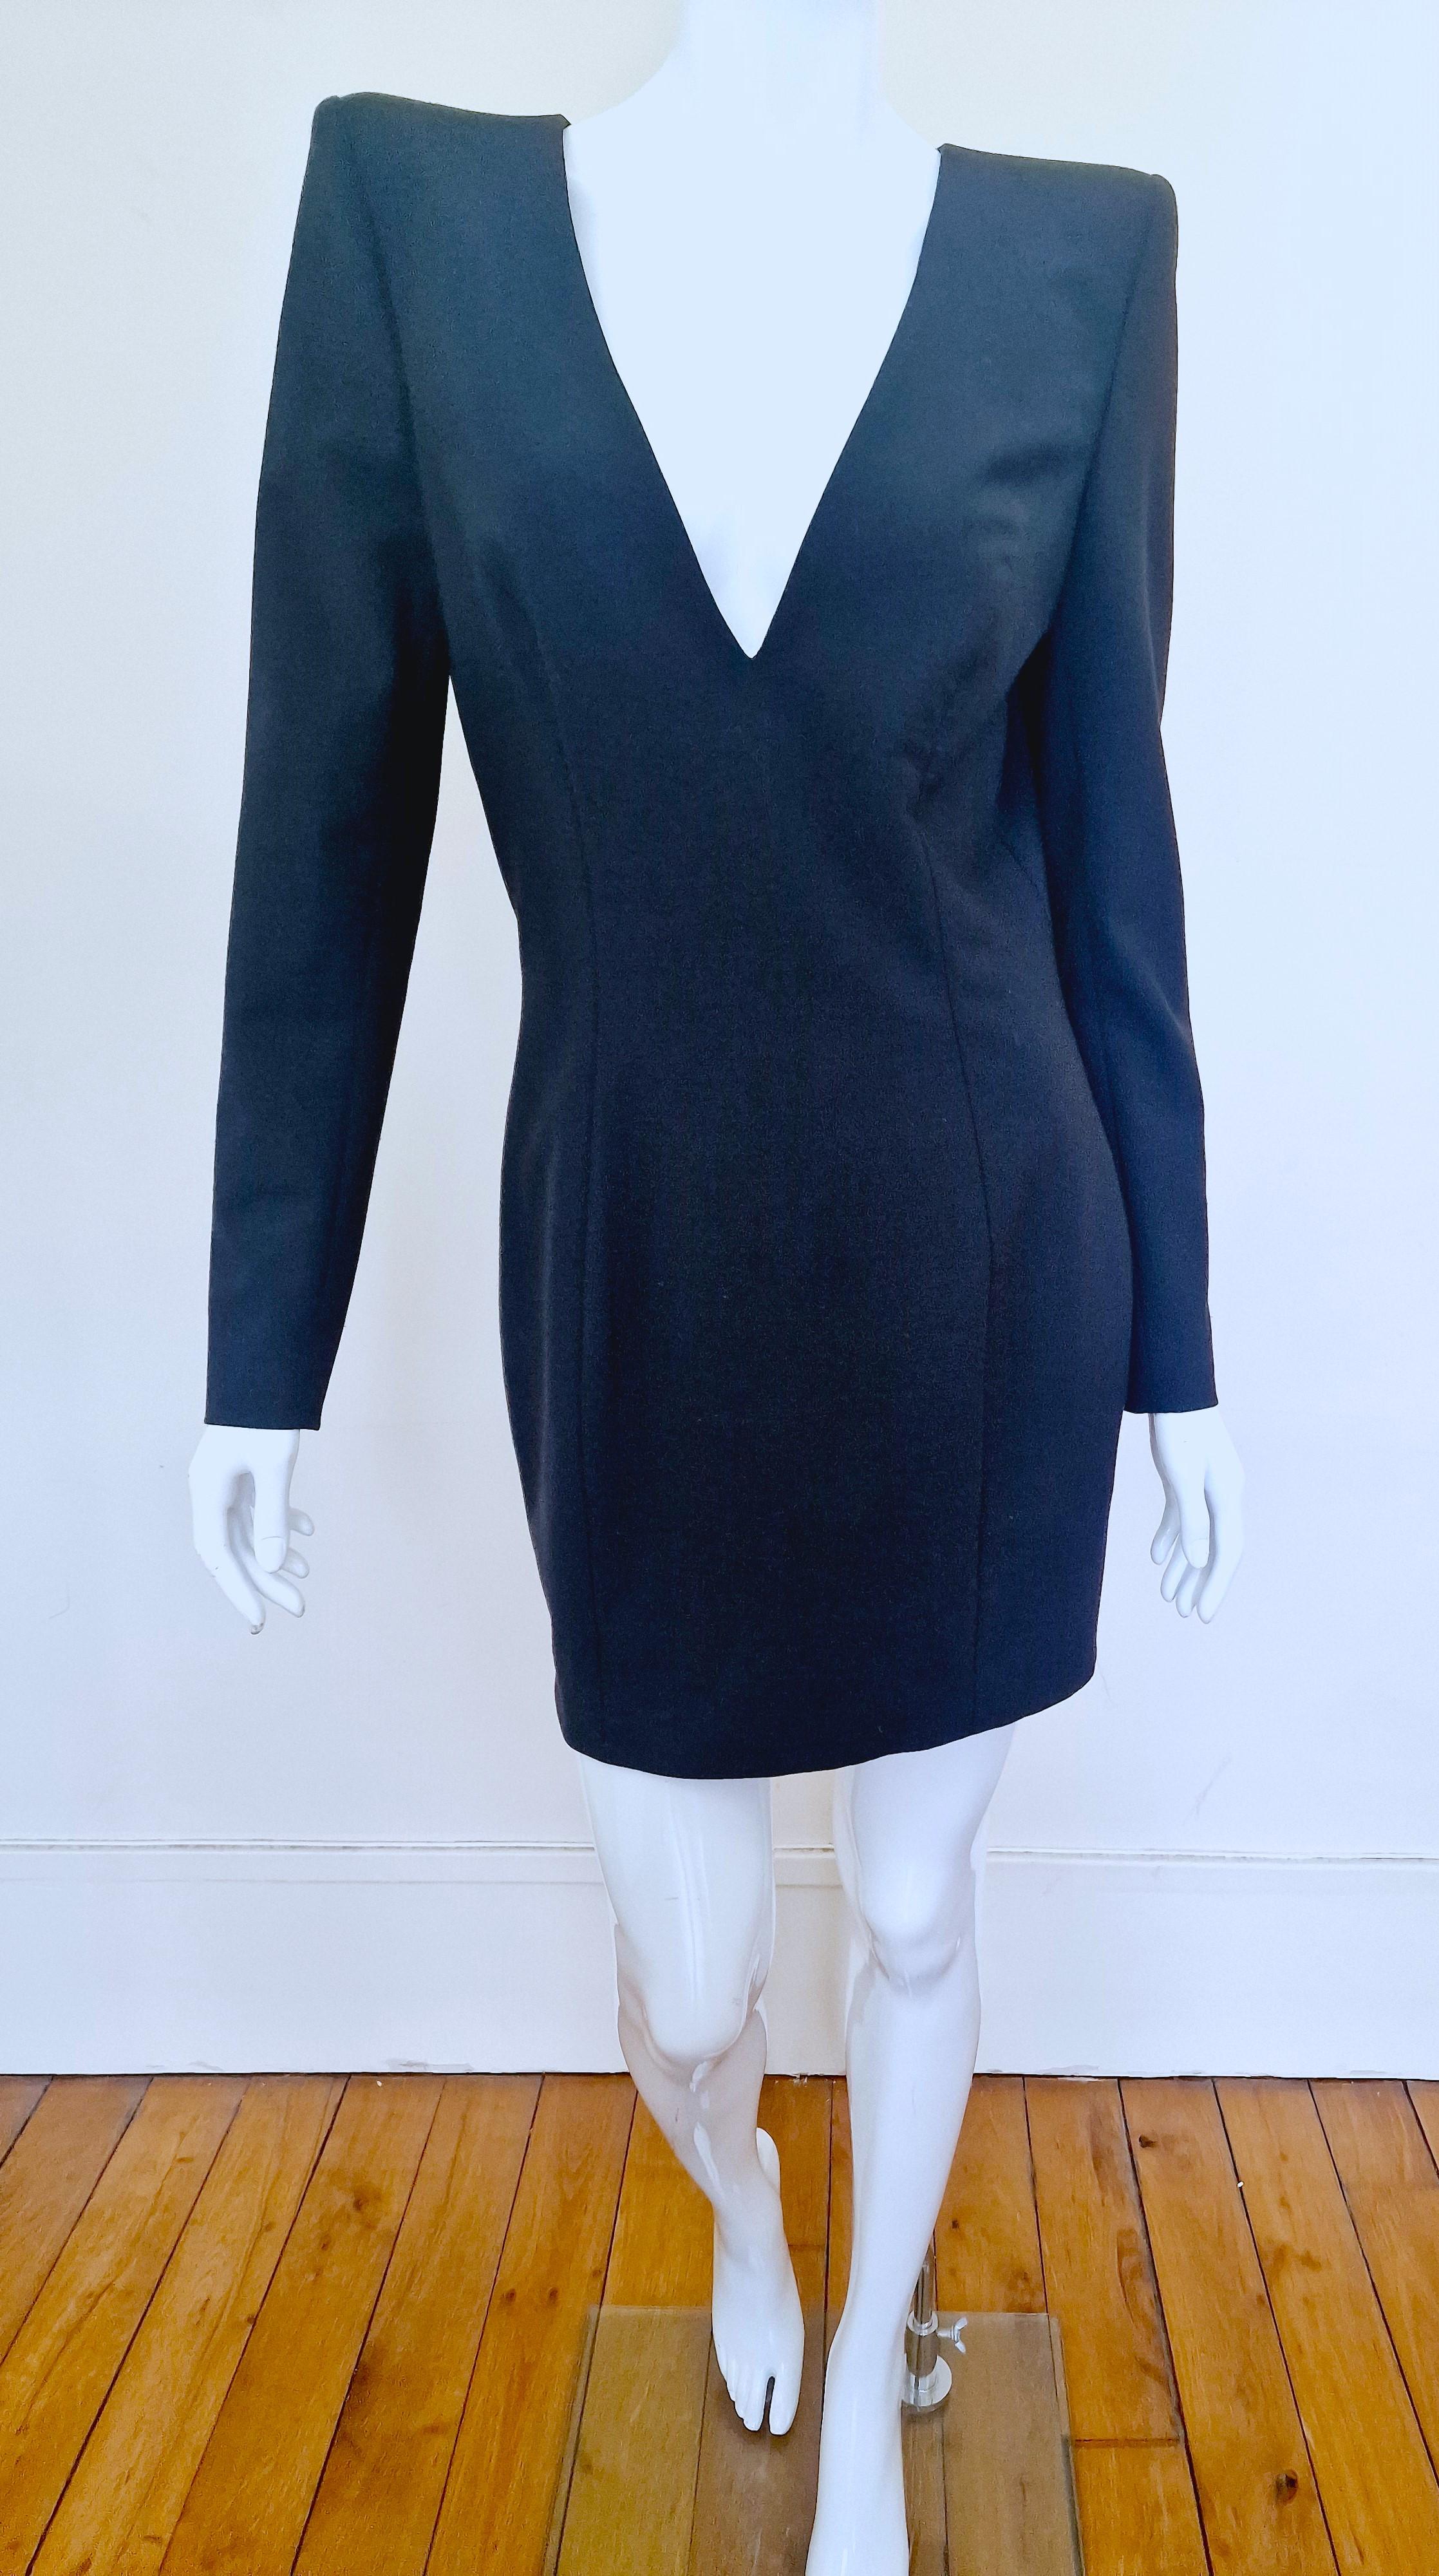 Elegant dress by John Galliano!
Sharp look! With massive shoulder pads!
Wide shoulder look!
9-9 buttons at the wrists!

LIKE NEW!

SIZE
Large.
Marked size: FR42 / GB14 / D40 / USA 10.
Length: 85 cm / 33.4 inch
Bust: 44 cm / 17.3 inch
Waist: 37 cm /